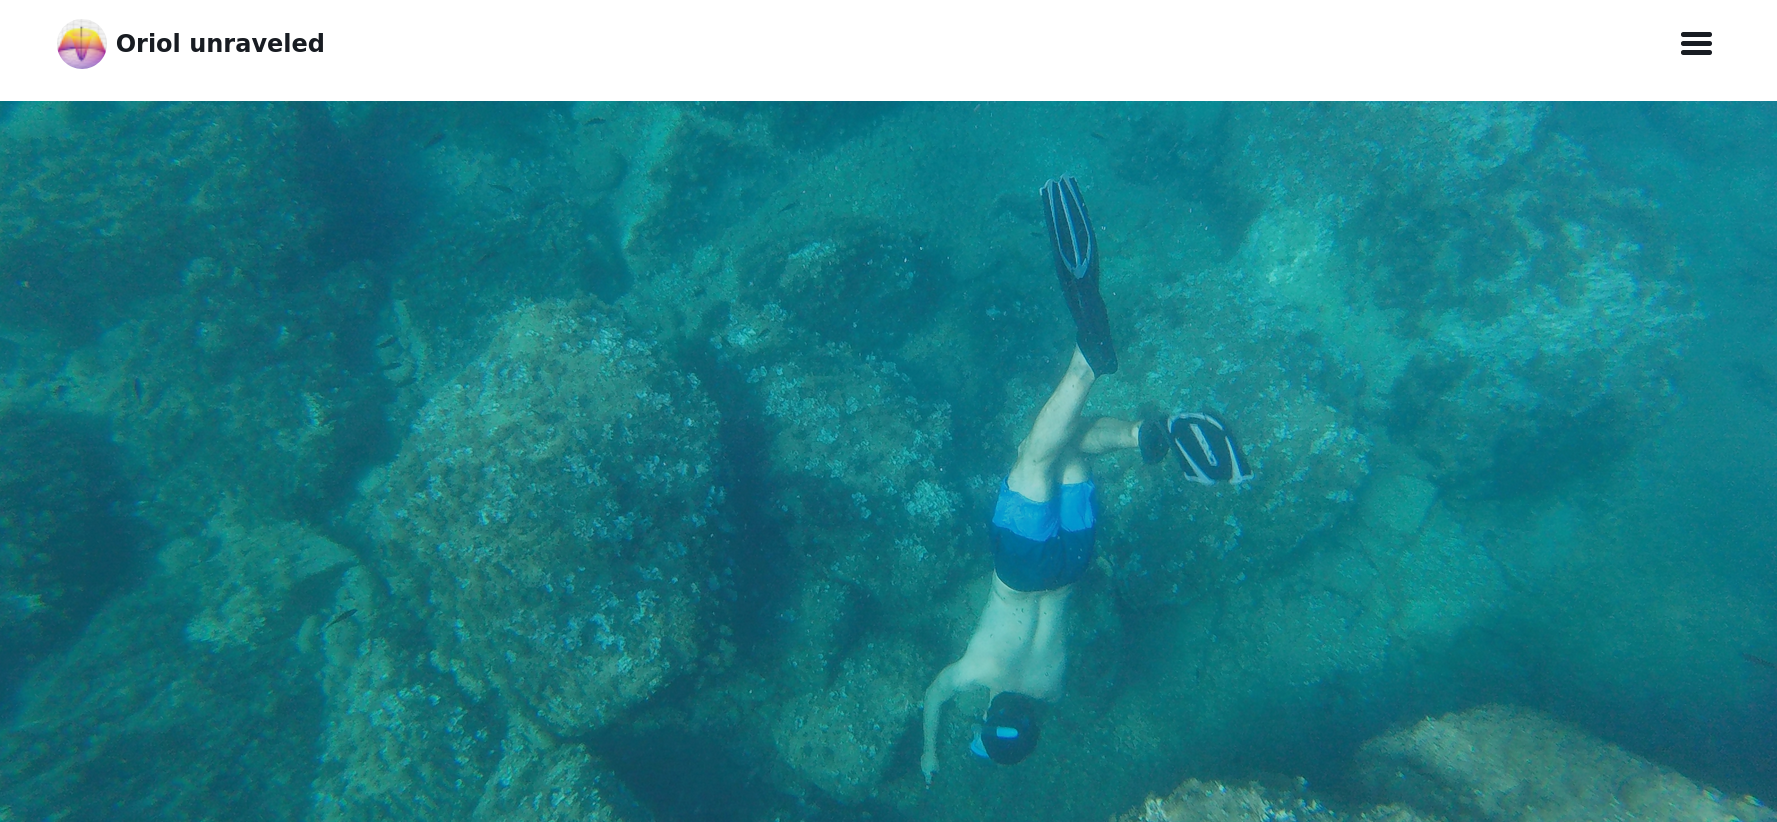 Initial layout of the blog homepage, the snorkeling image takes all the screen